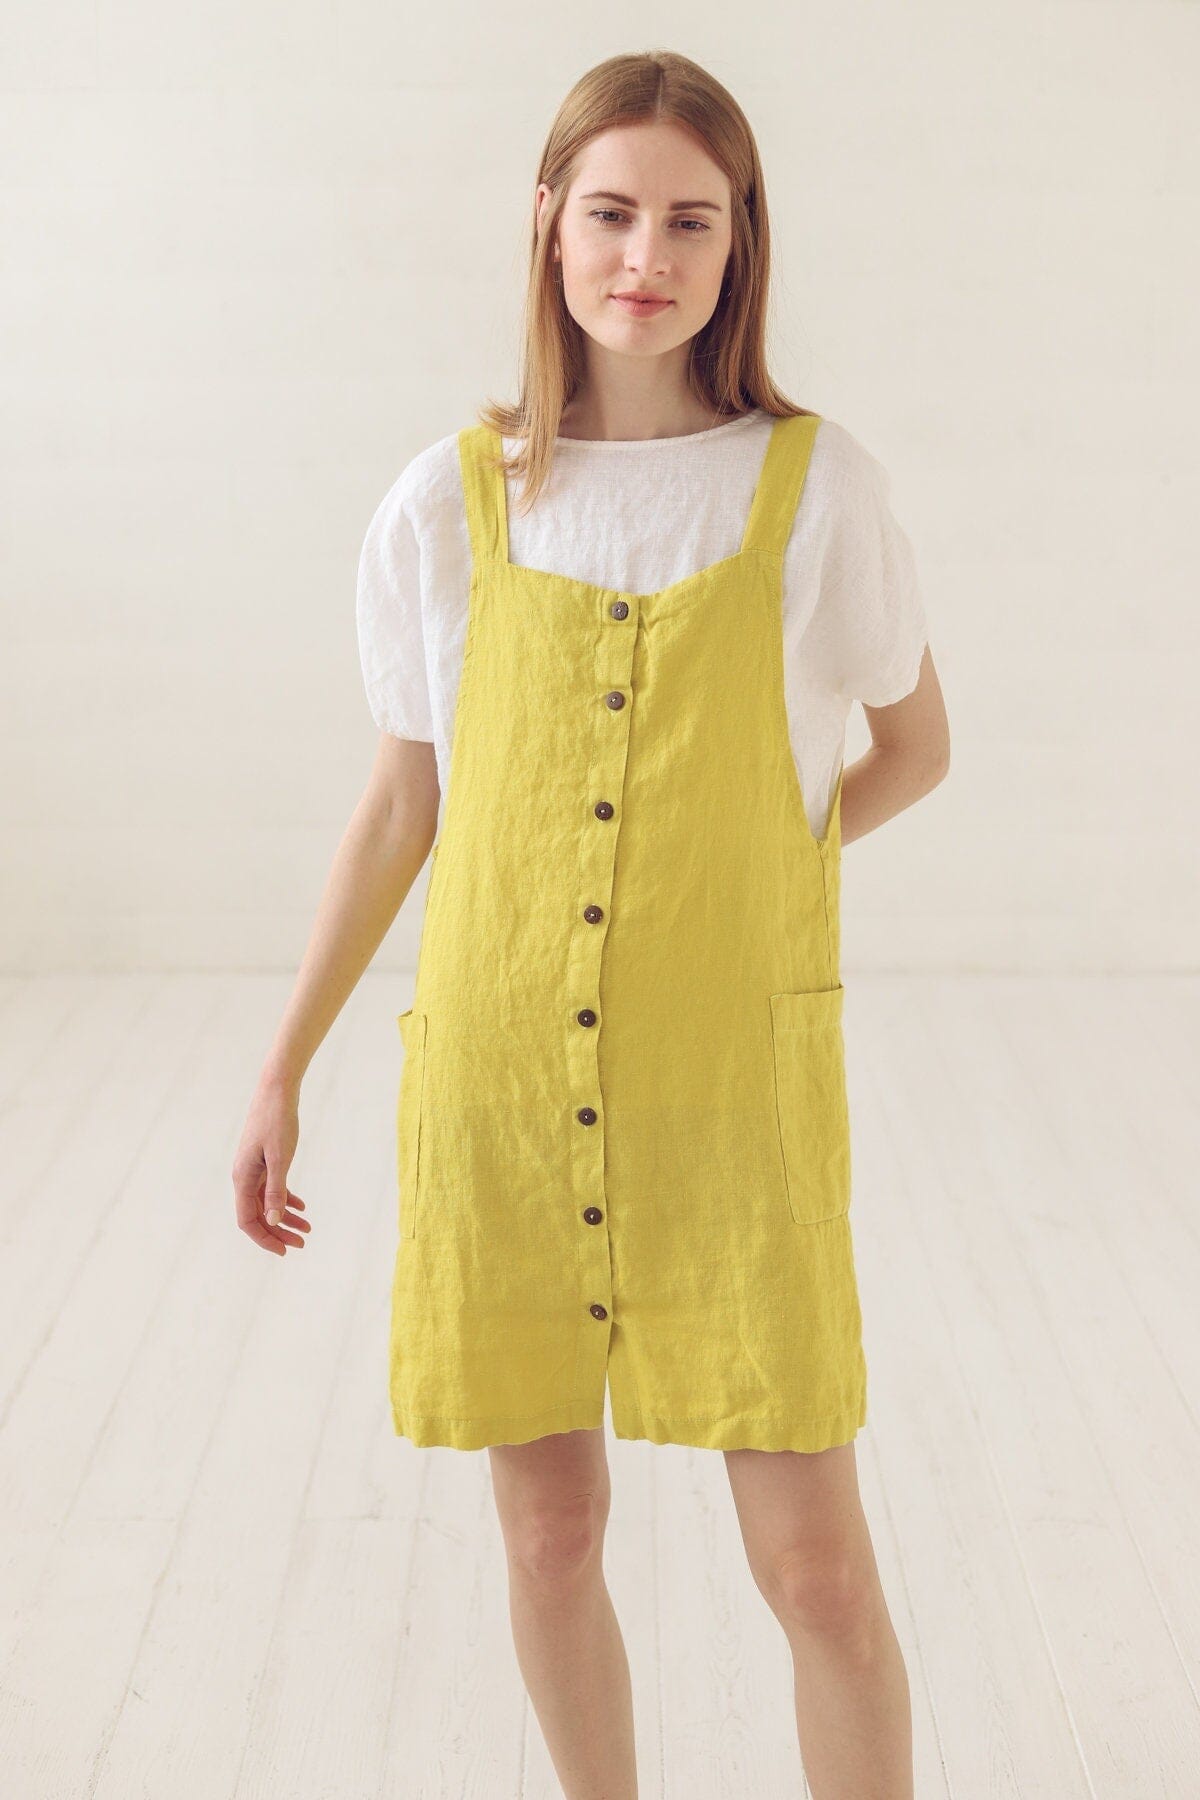 Women Girls Vintage Cute Pleated Apron O Neck Gardening Works Cotton  Sleeveless Overall Smock Pinafore Dress (white, 40